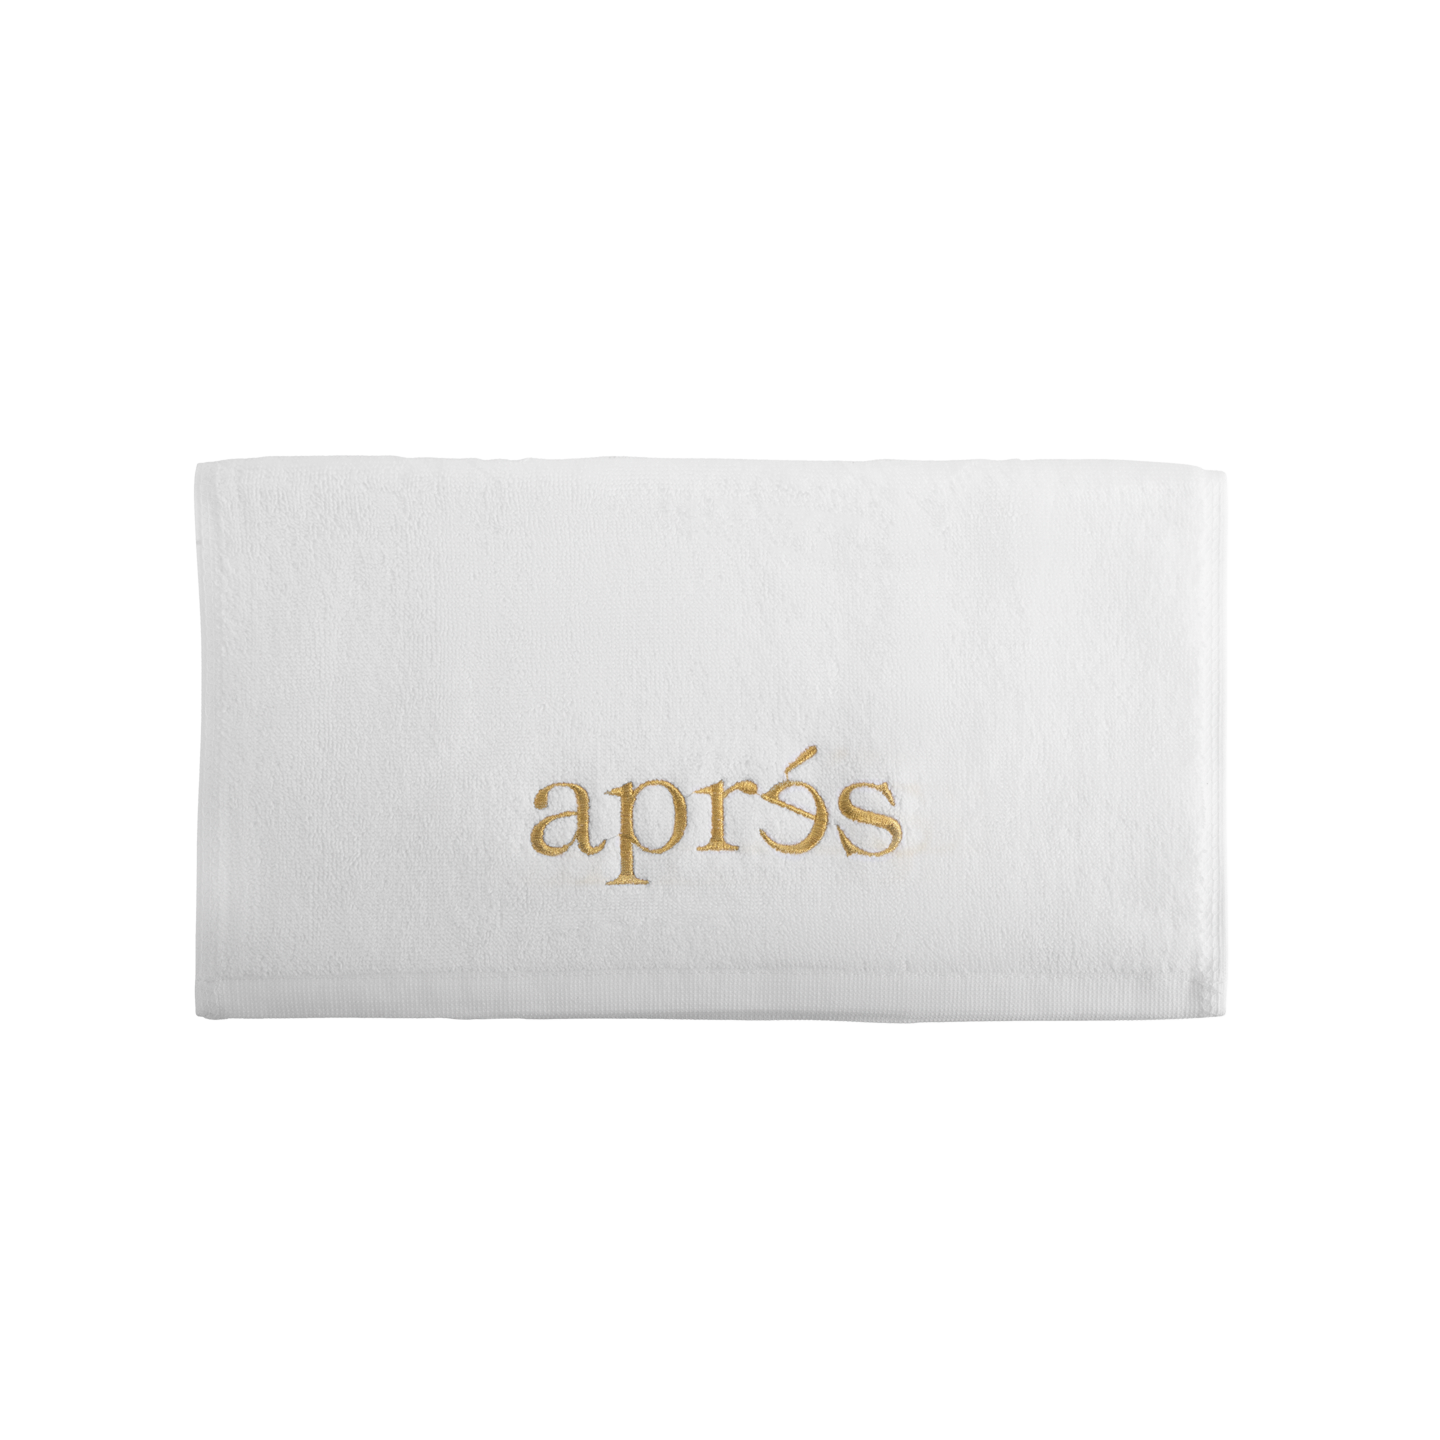 White Hand Towel by Apres